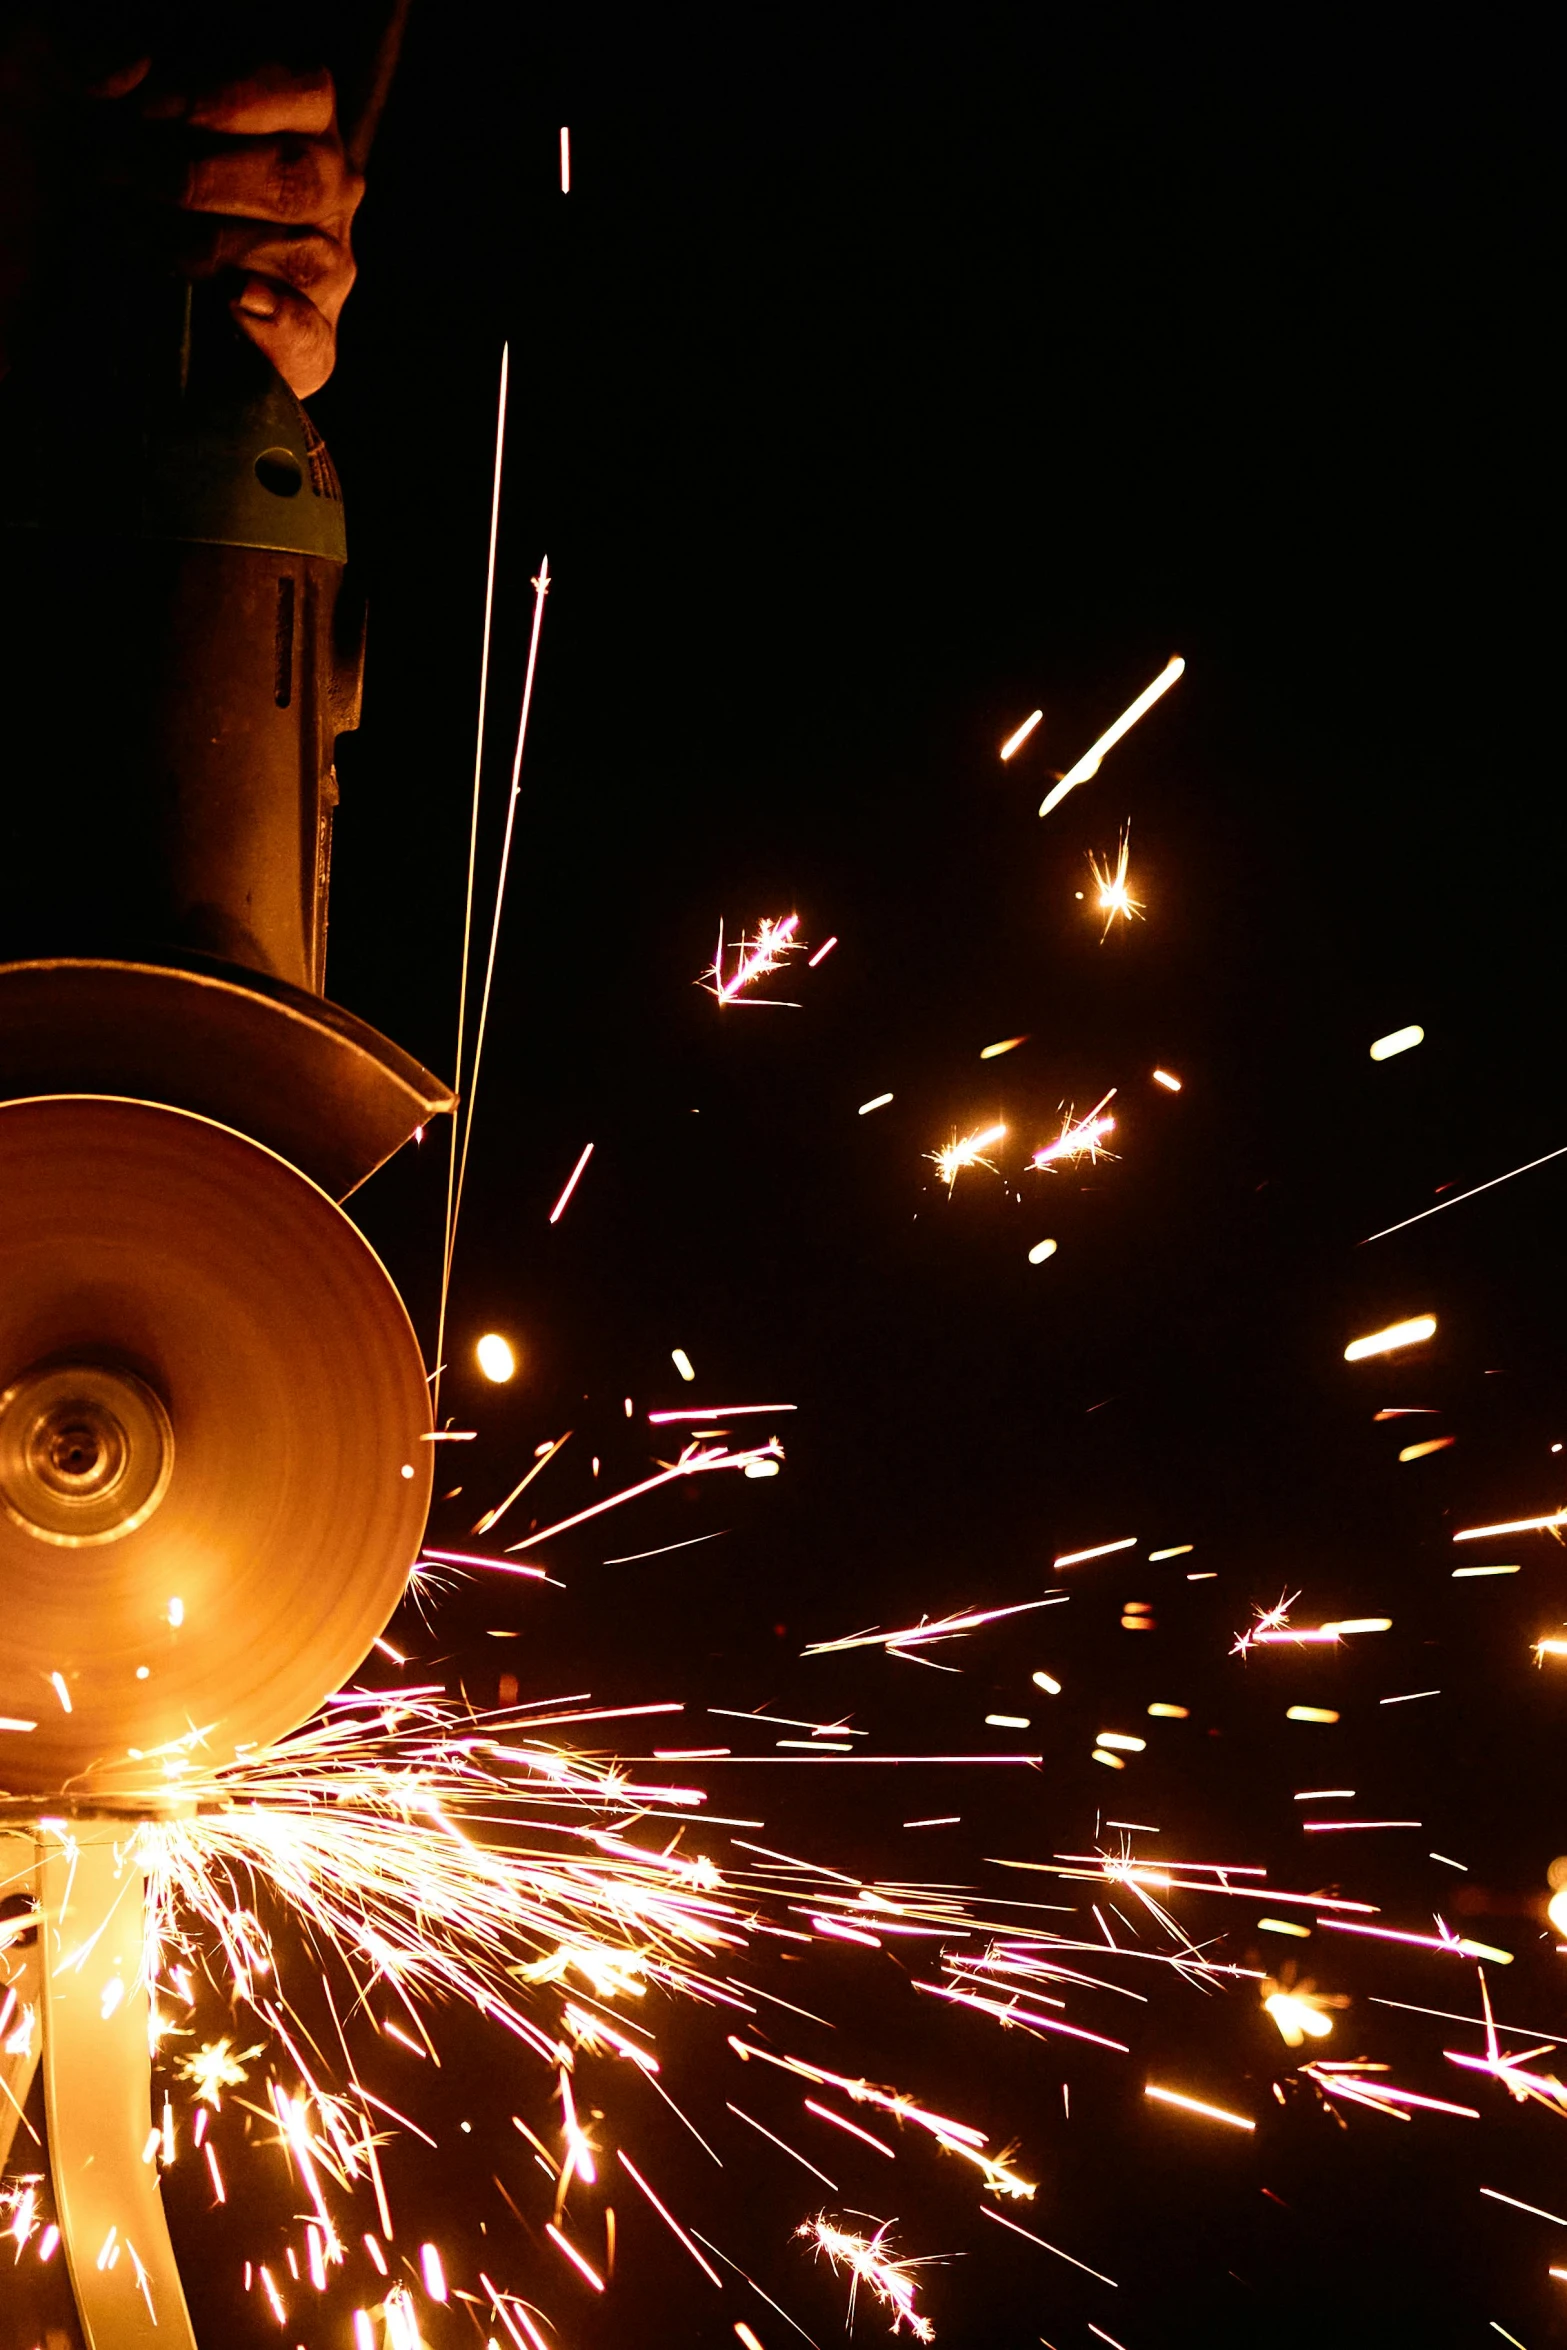 a man grinding a piece of metal with a grinder, an album cover, pexels contest winner, process art, fireworks, steel mill, ilustration, museum quality photo